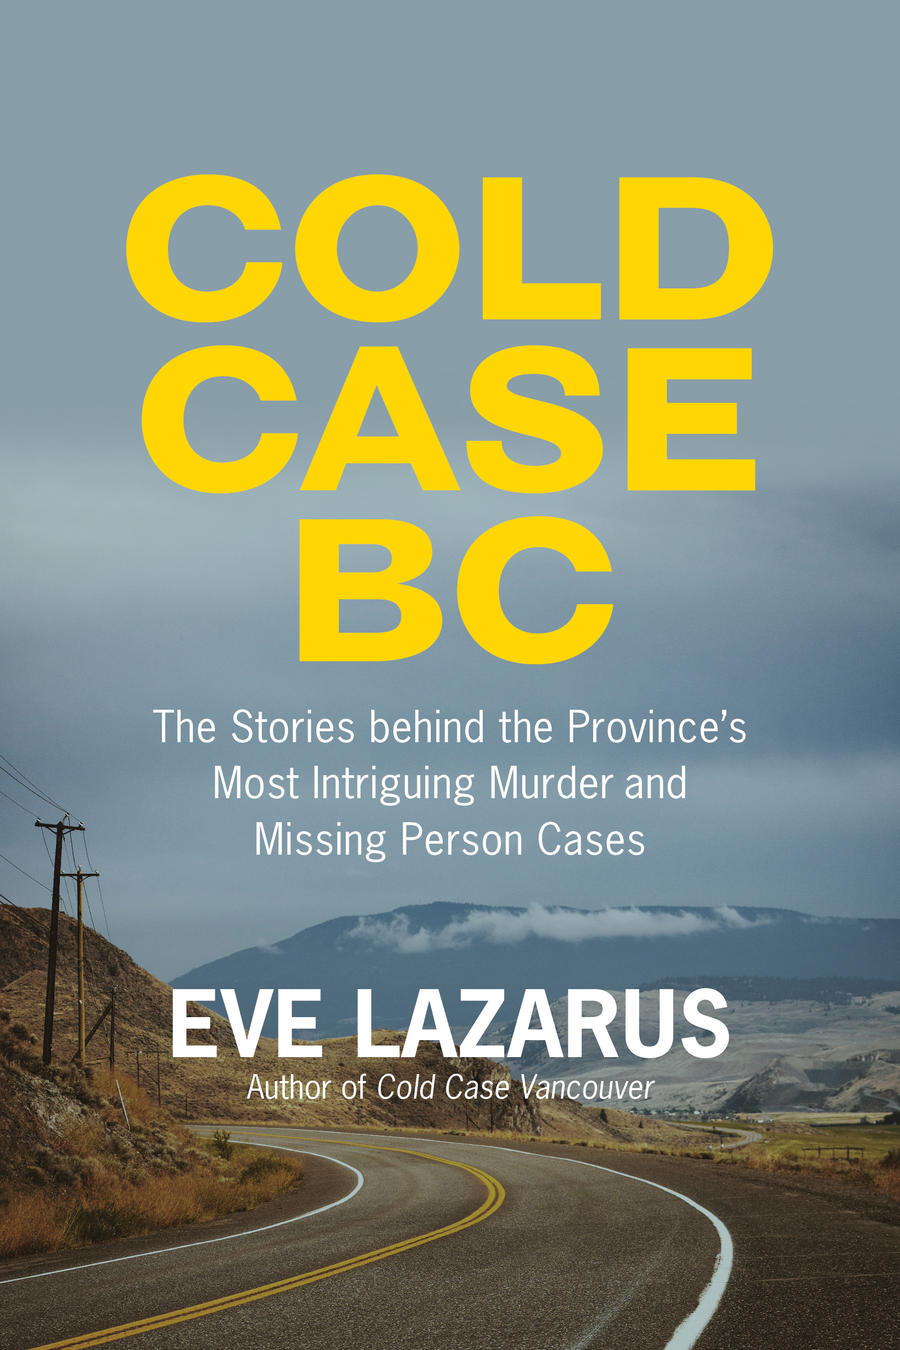 Cold Case BC: The Stories behind the Province’s Most Intriguing Murder and Missing Persons Cases